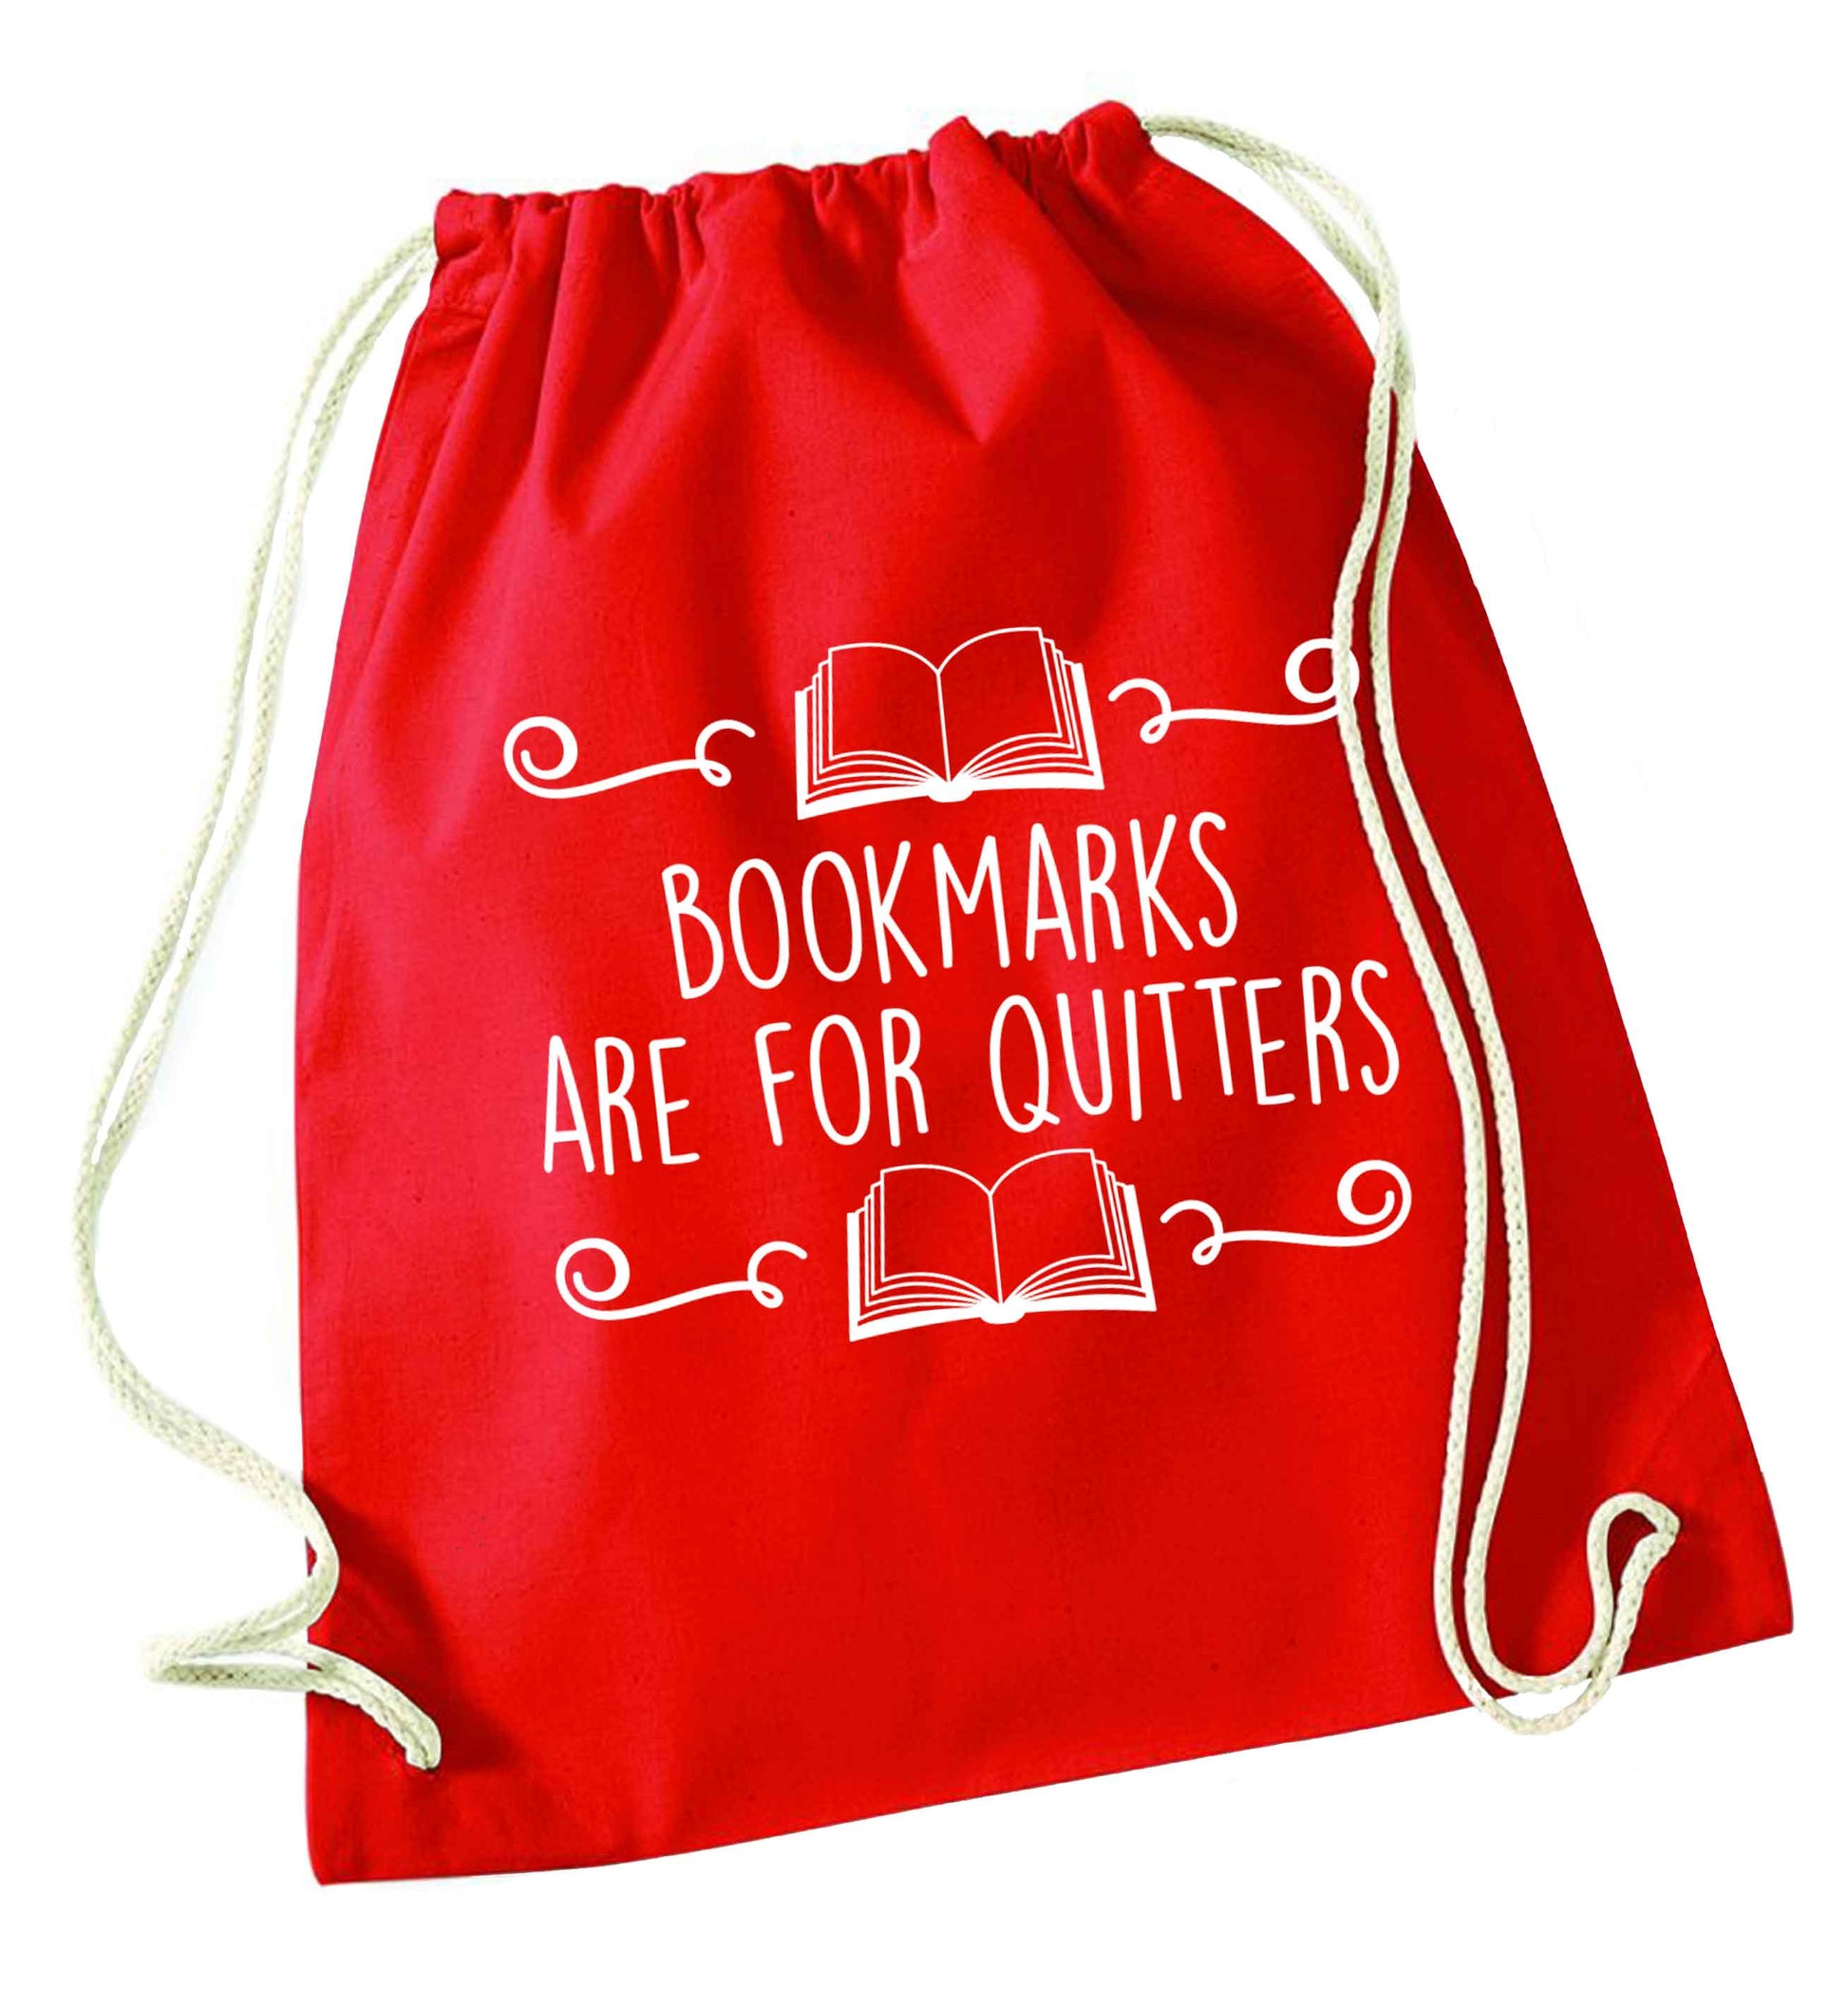 Bookmarks are for quitters red drawstring bag 